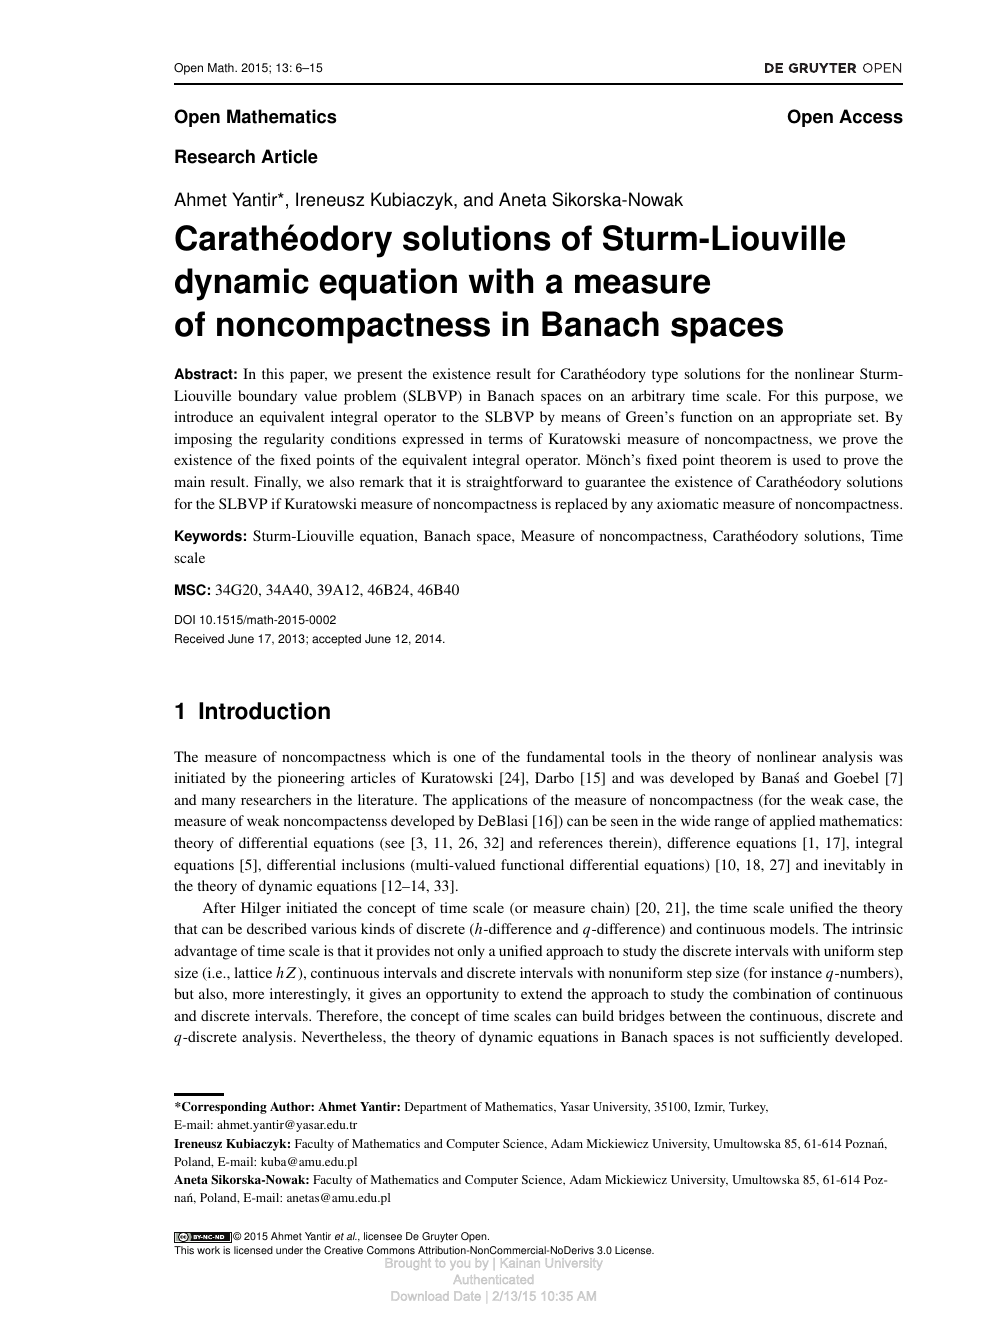 Caratheodory Solutions Of Sturm Liouville Dynamic Equation With A Measure Of Noncompactness In Banach Spaces Topic Of Research Paper In Mathematics Download Scholarly Article Pdf And Read For Free On Cyberleninka Open